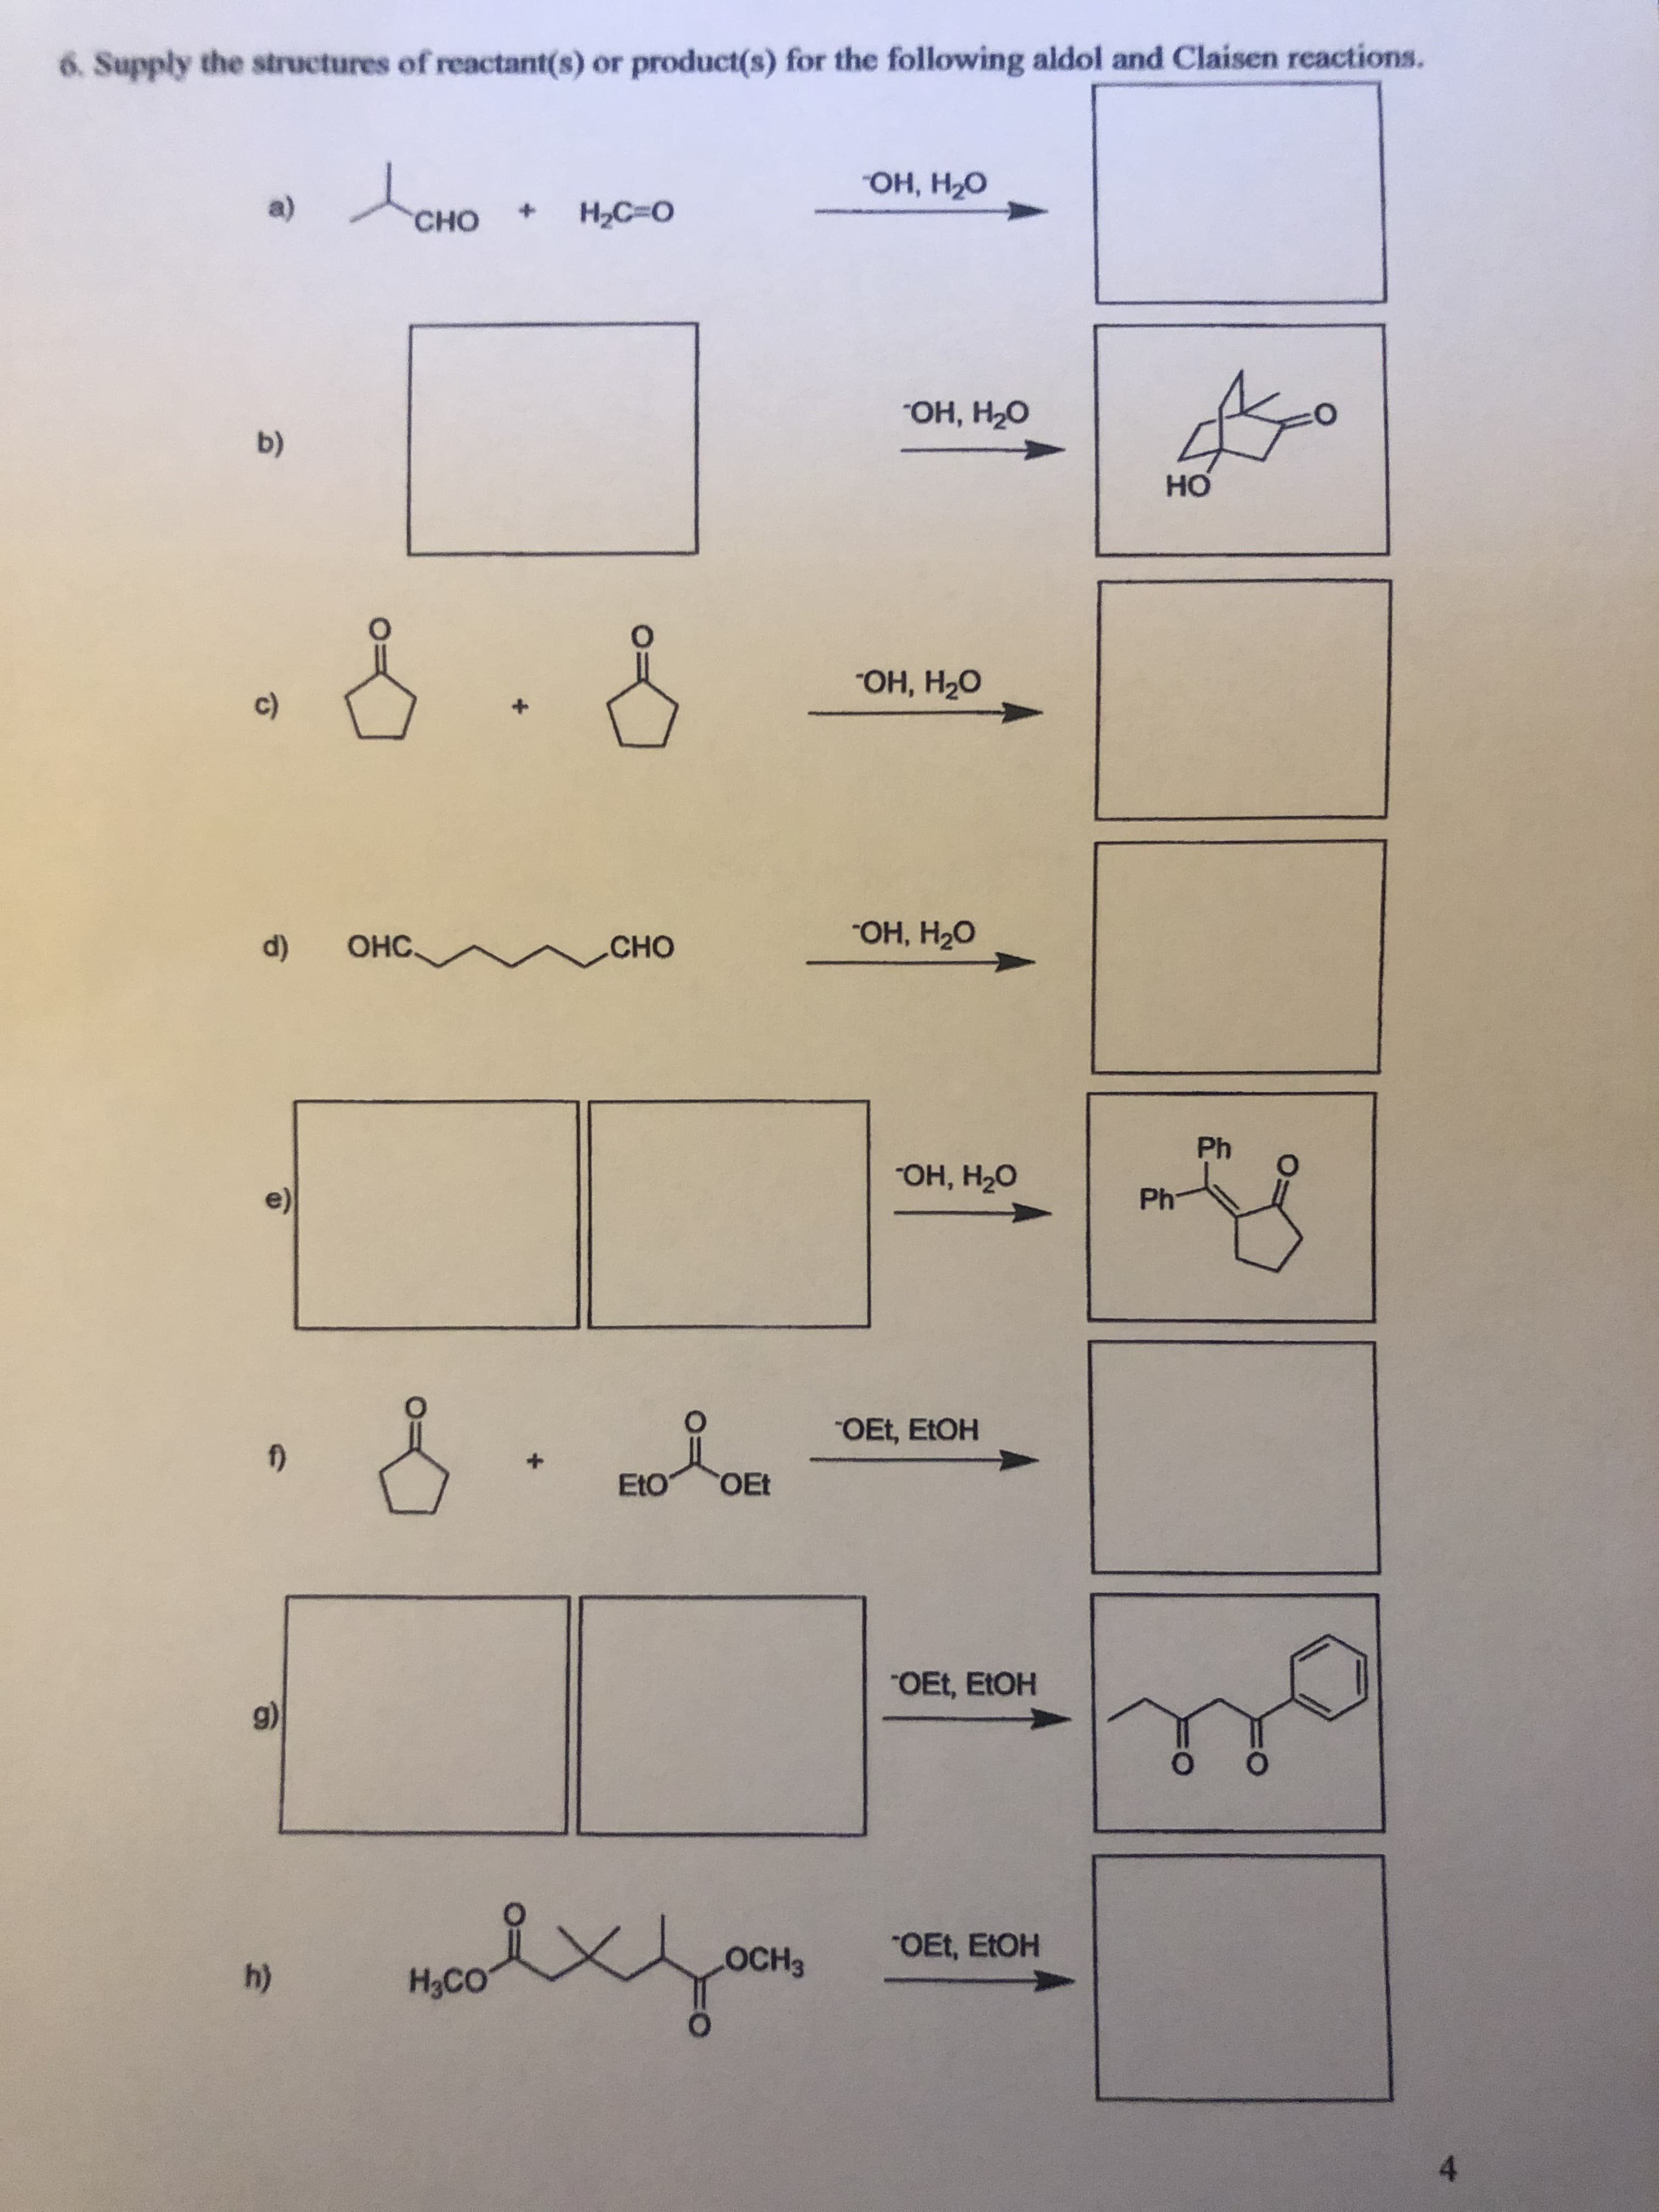 ly the structures of reactant(s) or product(s) for the following aldol and Claisen reactions.
он, Н-о
a)
Н-С-о
+]
Cно
Он, Н-о
b)
но
Он, Н-о
c)
ОН, Нао
d)
ОНС.
CHO
Ph
Он, Н-о
Ph
OEt, ELOH
EtO
OEt
